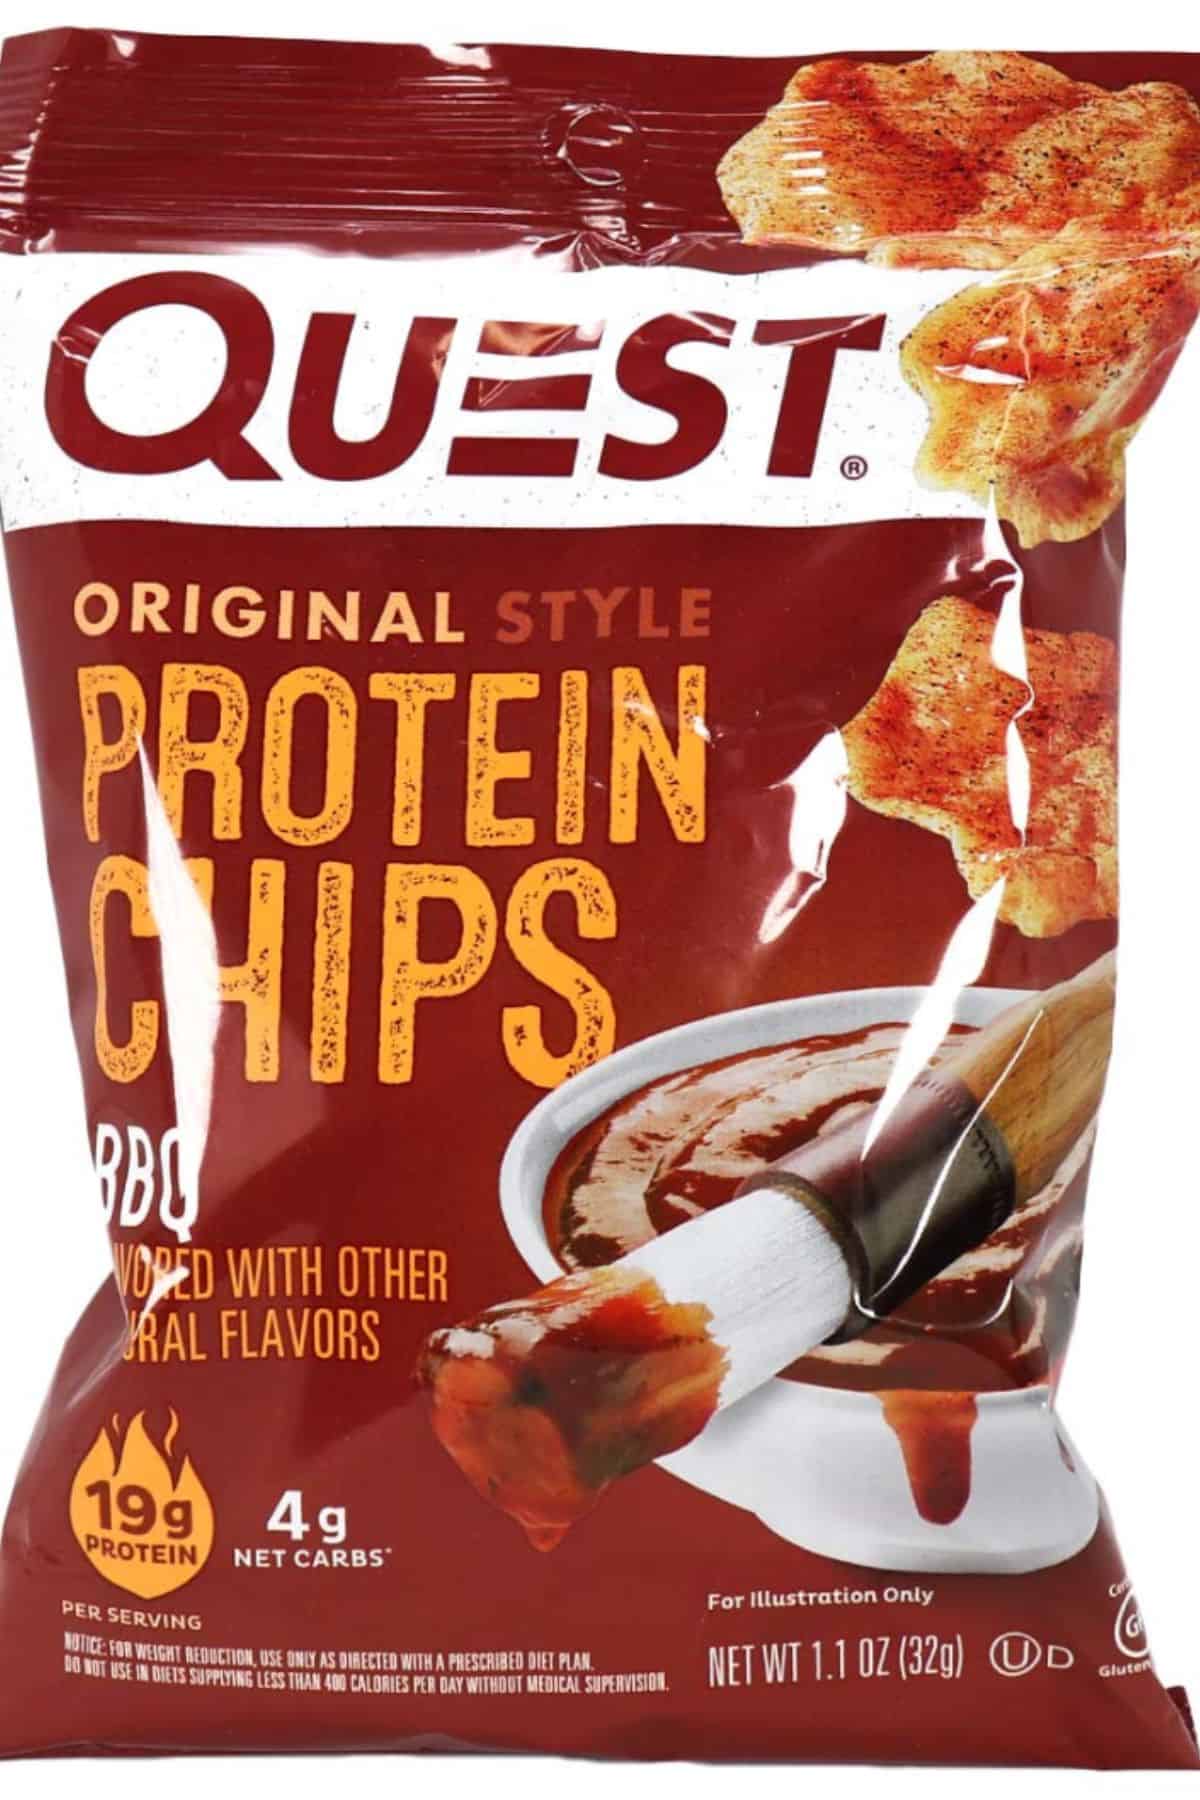 bag of quest chips original style bbq flavor.